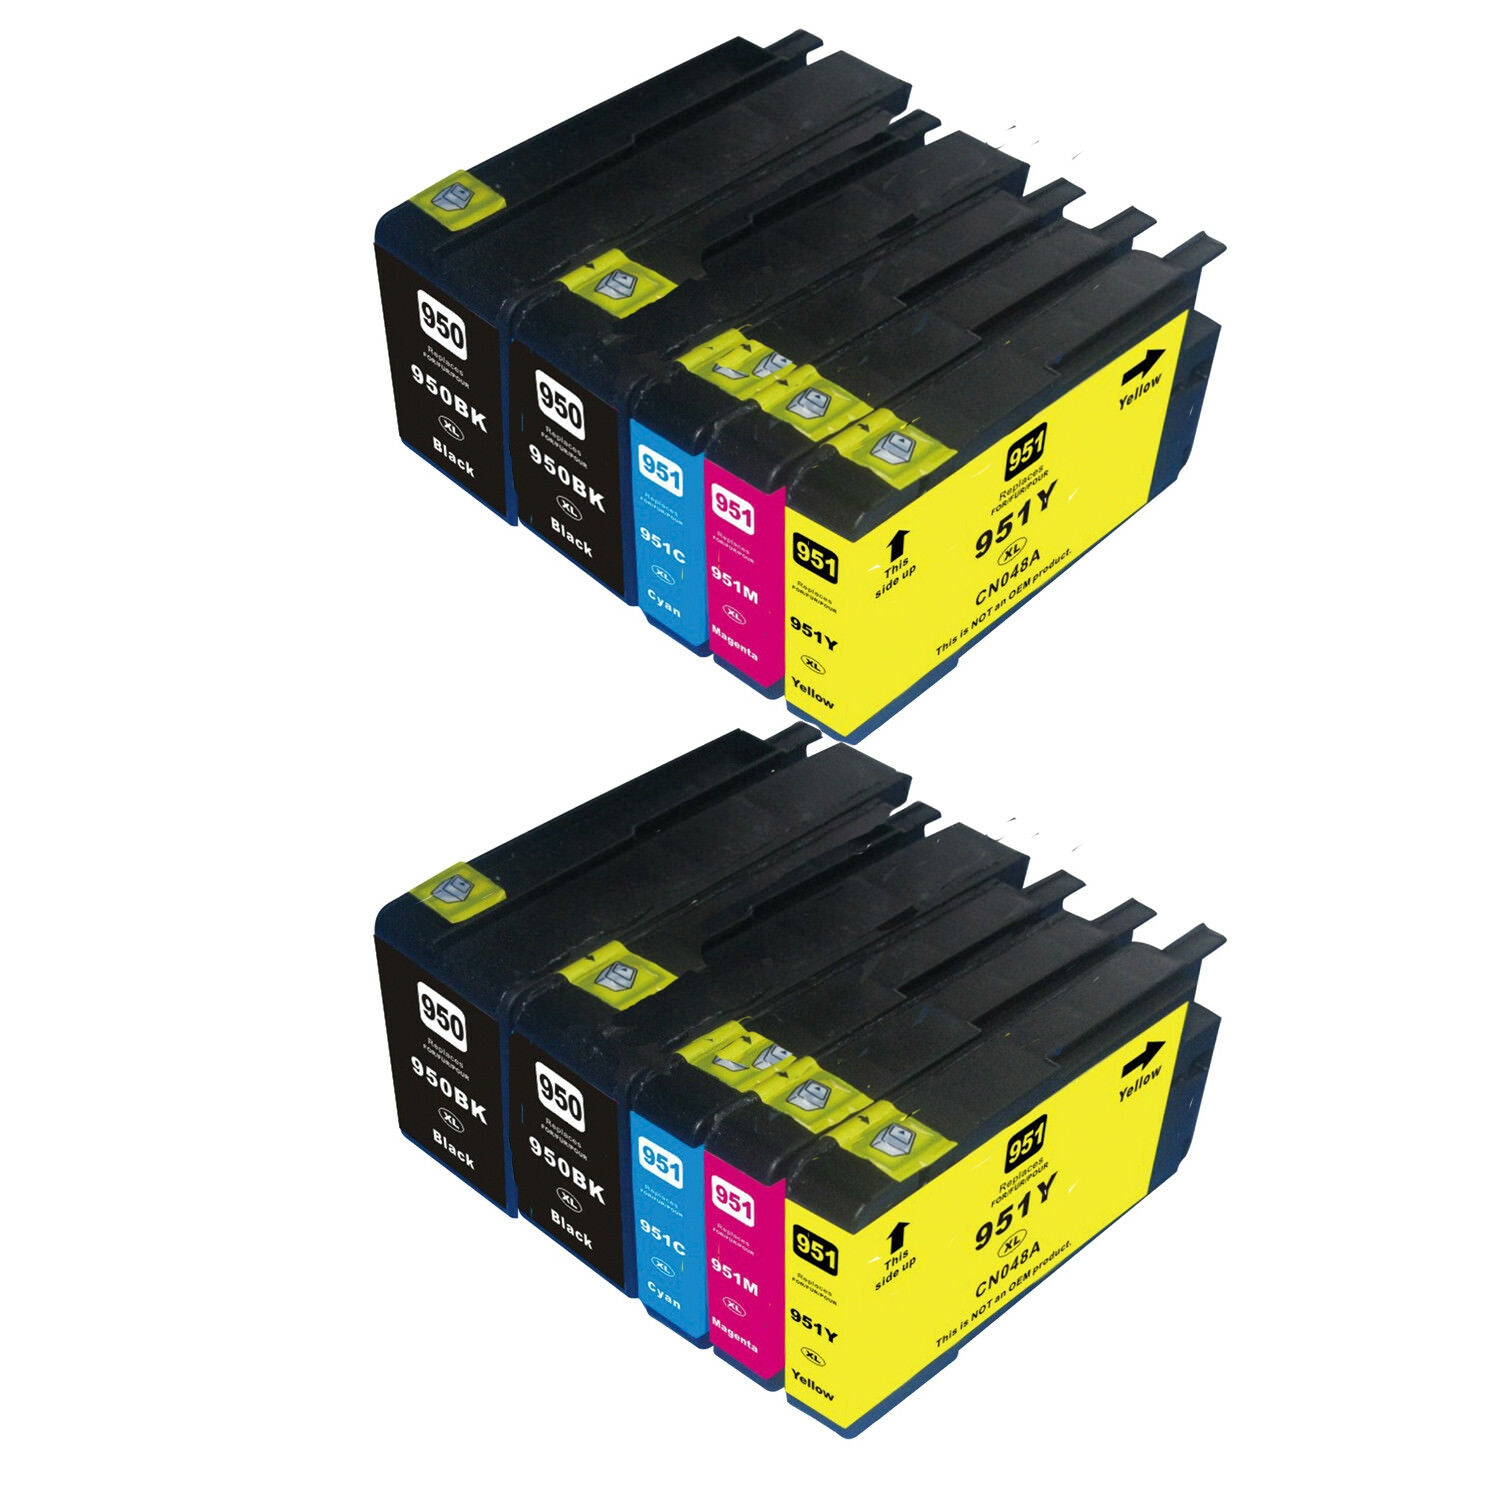 Max Saving - 10Pack(4K 2C 2M 2Y) Compatible Ink Cartridge 950XL,951XL for HP 950XL,HP951XL HP OfficeJet Pro 8100,Pro 8600,8610,8615,8620,8625,8630